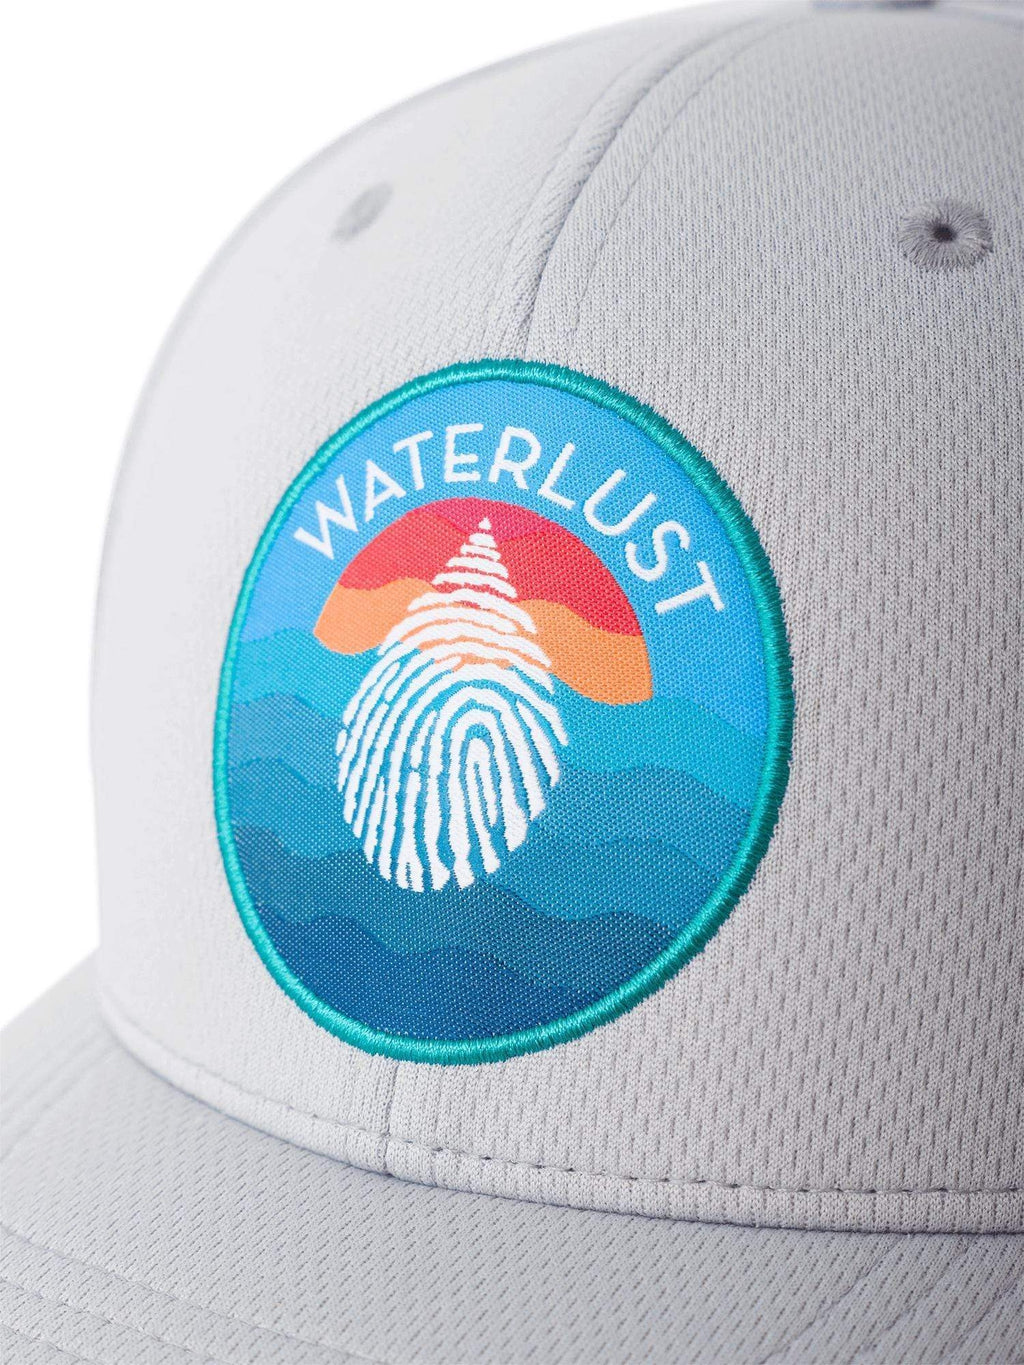 Close up view of the front of a gray full fabric hat with a waterlust logo patch showing a sunset over water.